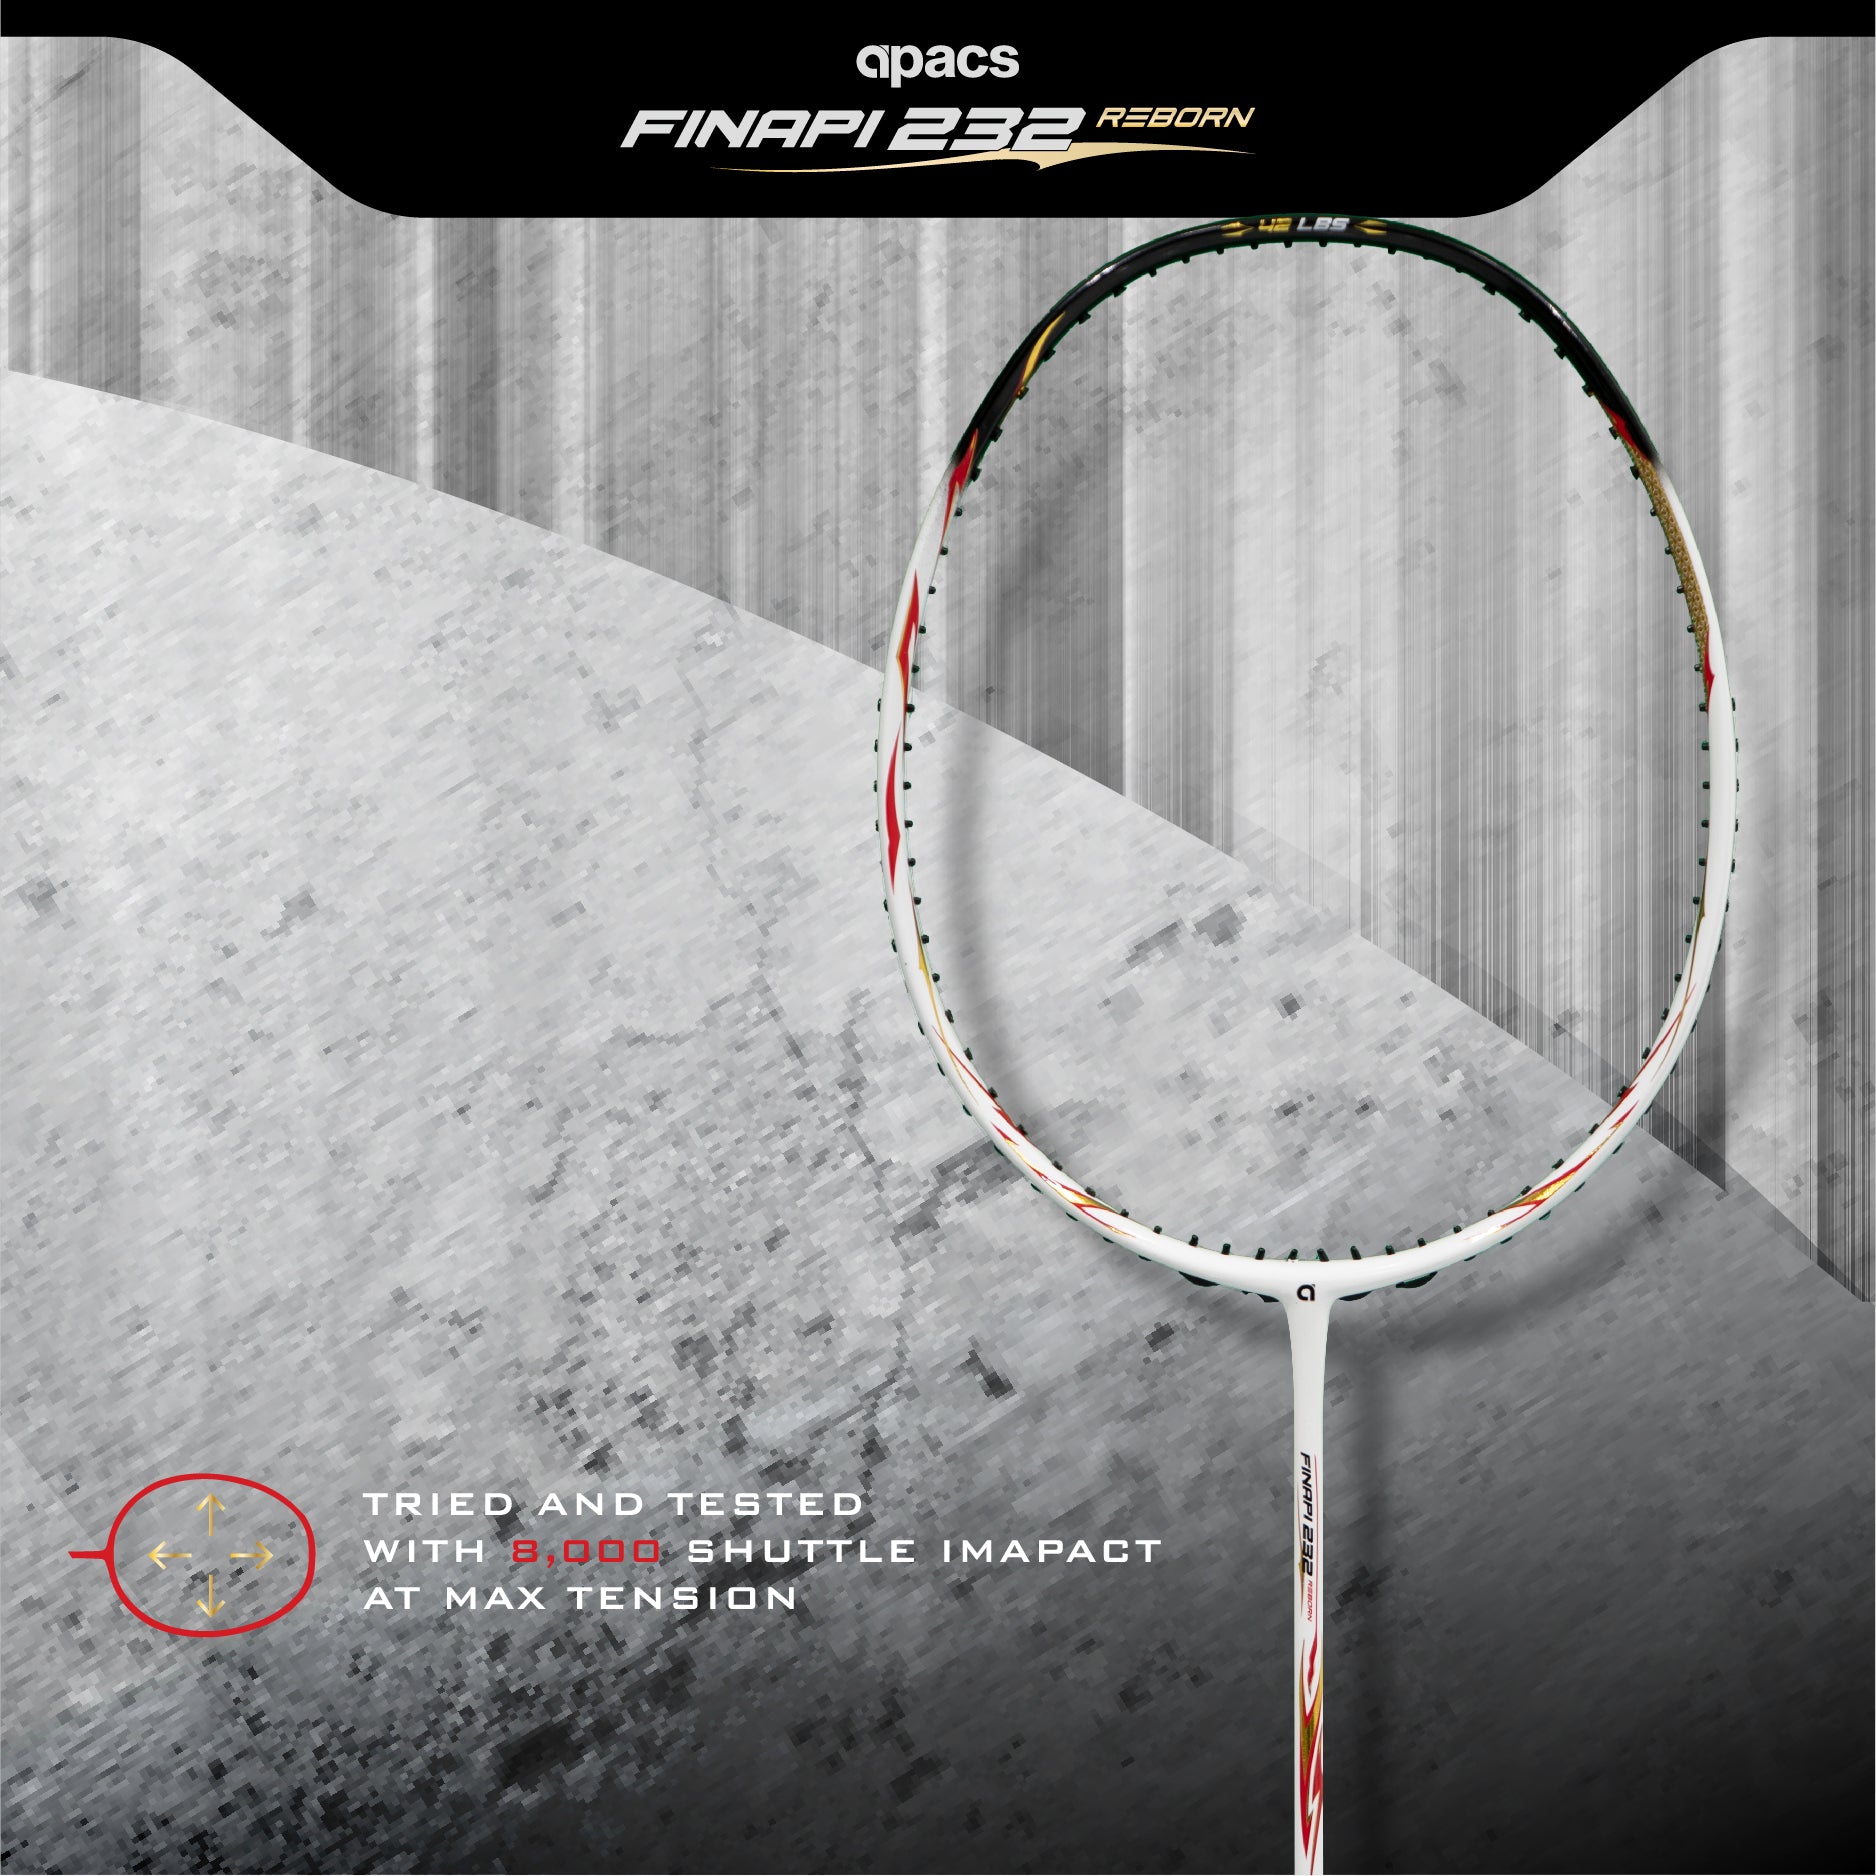 Apacs Finapi 232 Armor 38LBS Max Tension High Modulus Graphite Power Frame Unstrung Badminton Racket with Free Full Cover